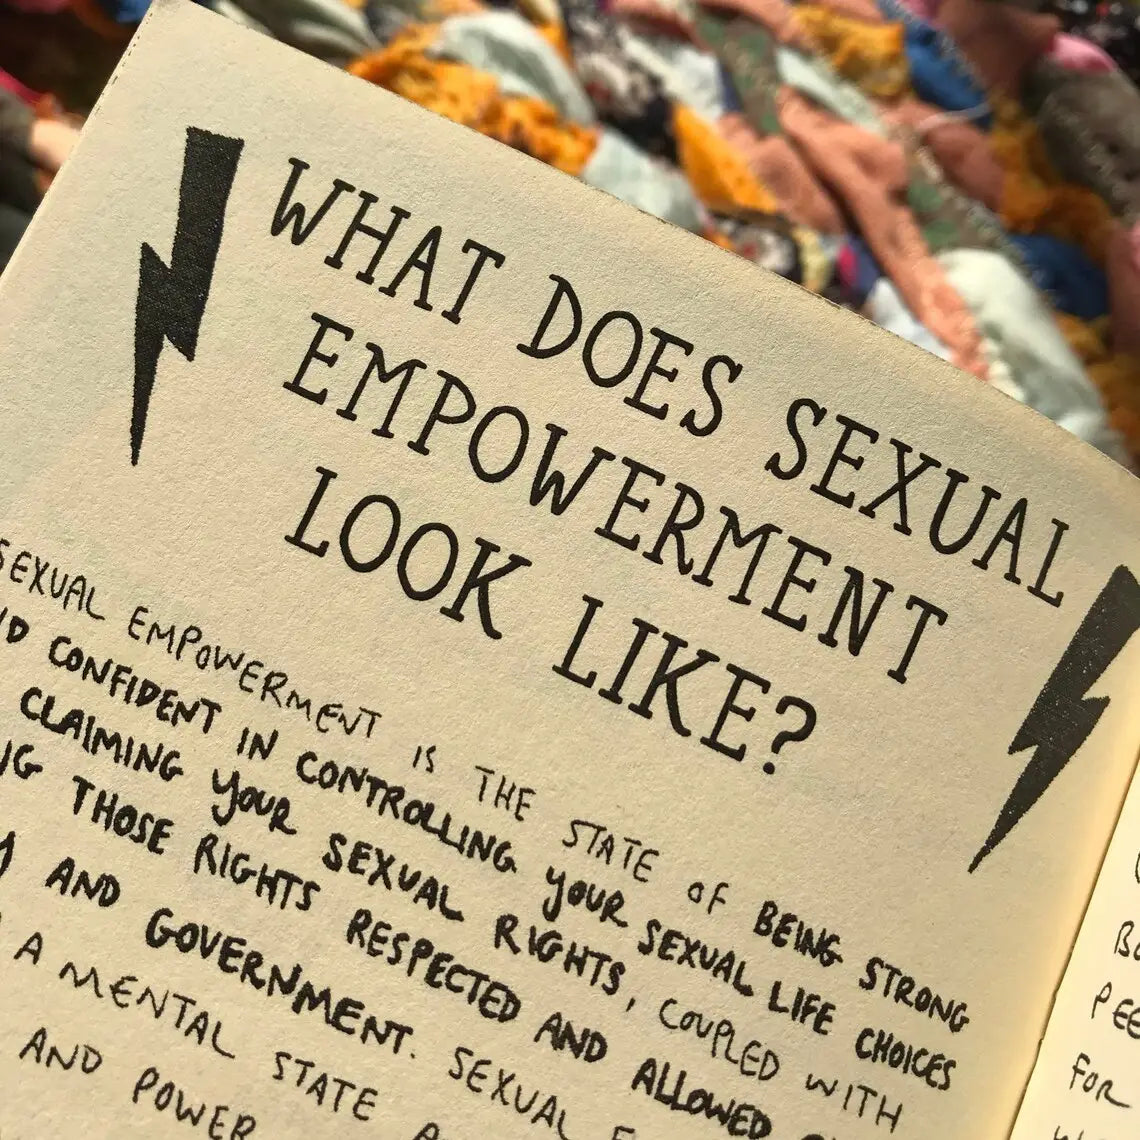 Sexual Freedom Activism Field Guide Zine